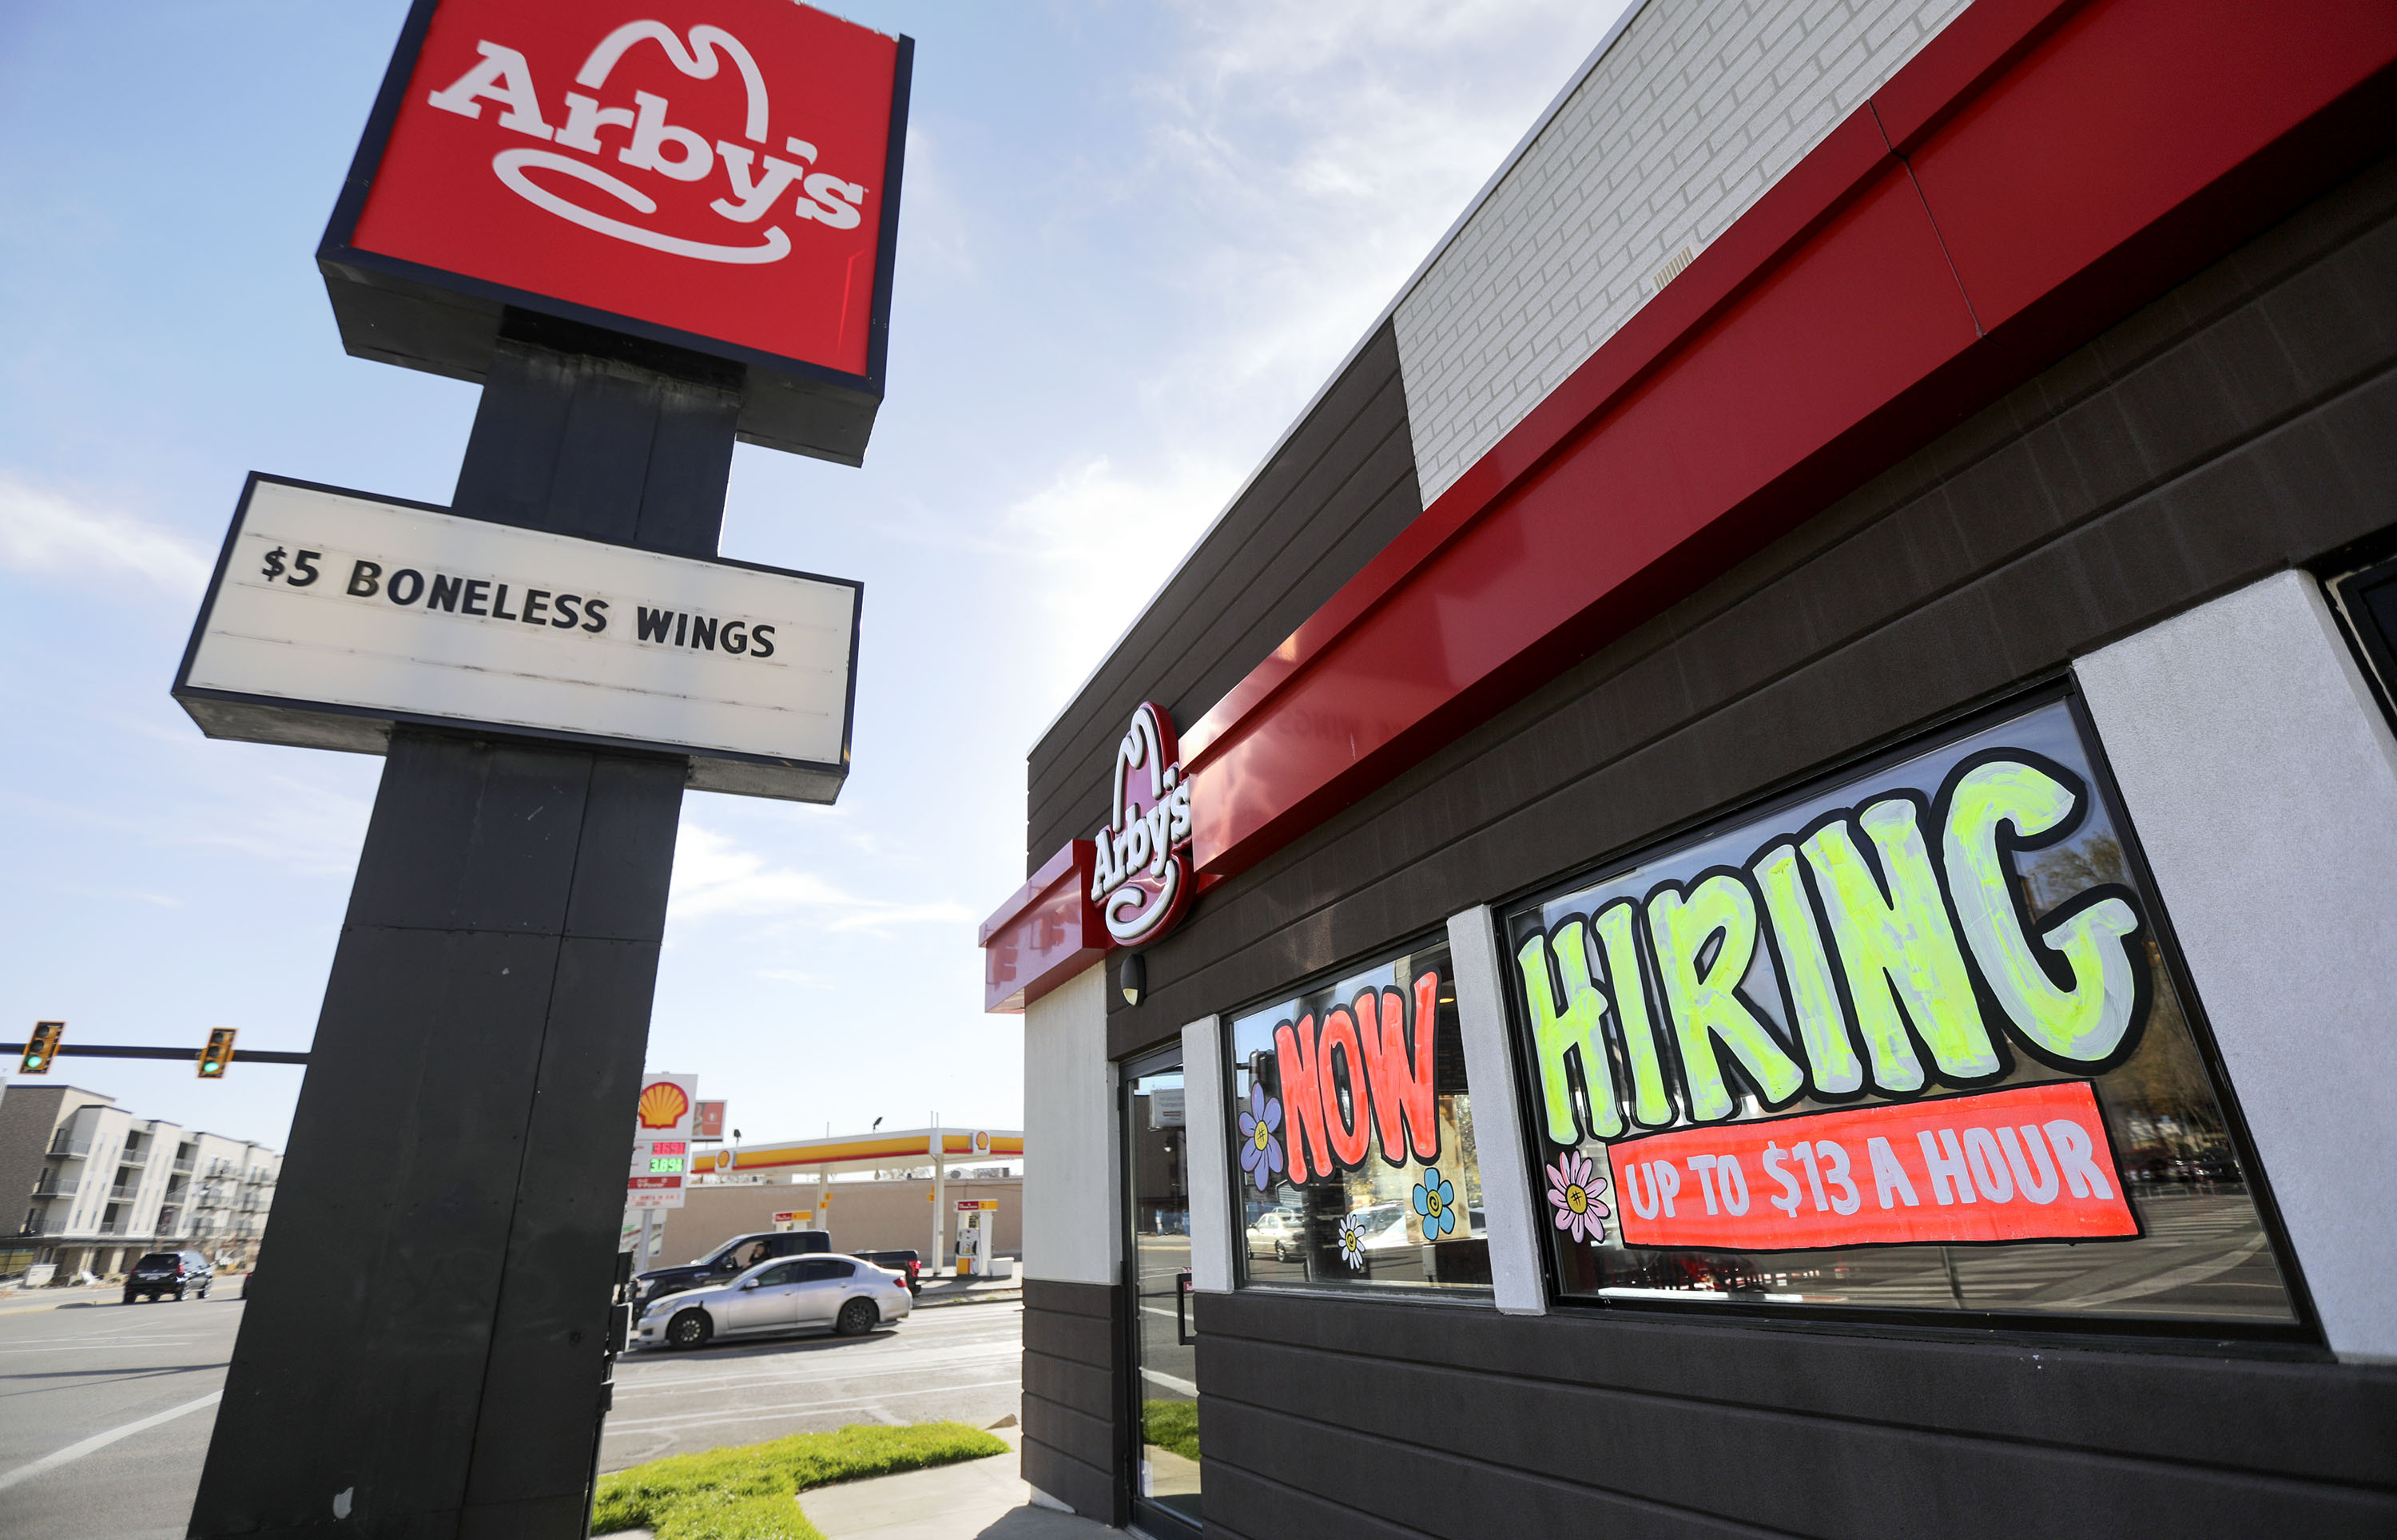 A “now hiring” sign is pictured at an Arby’s in Salt Lake City on Friday, Nov. 5, 2021.